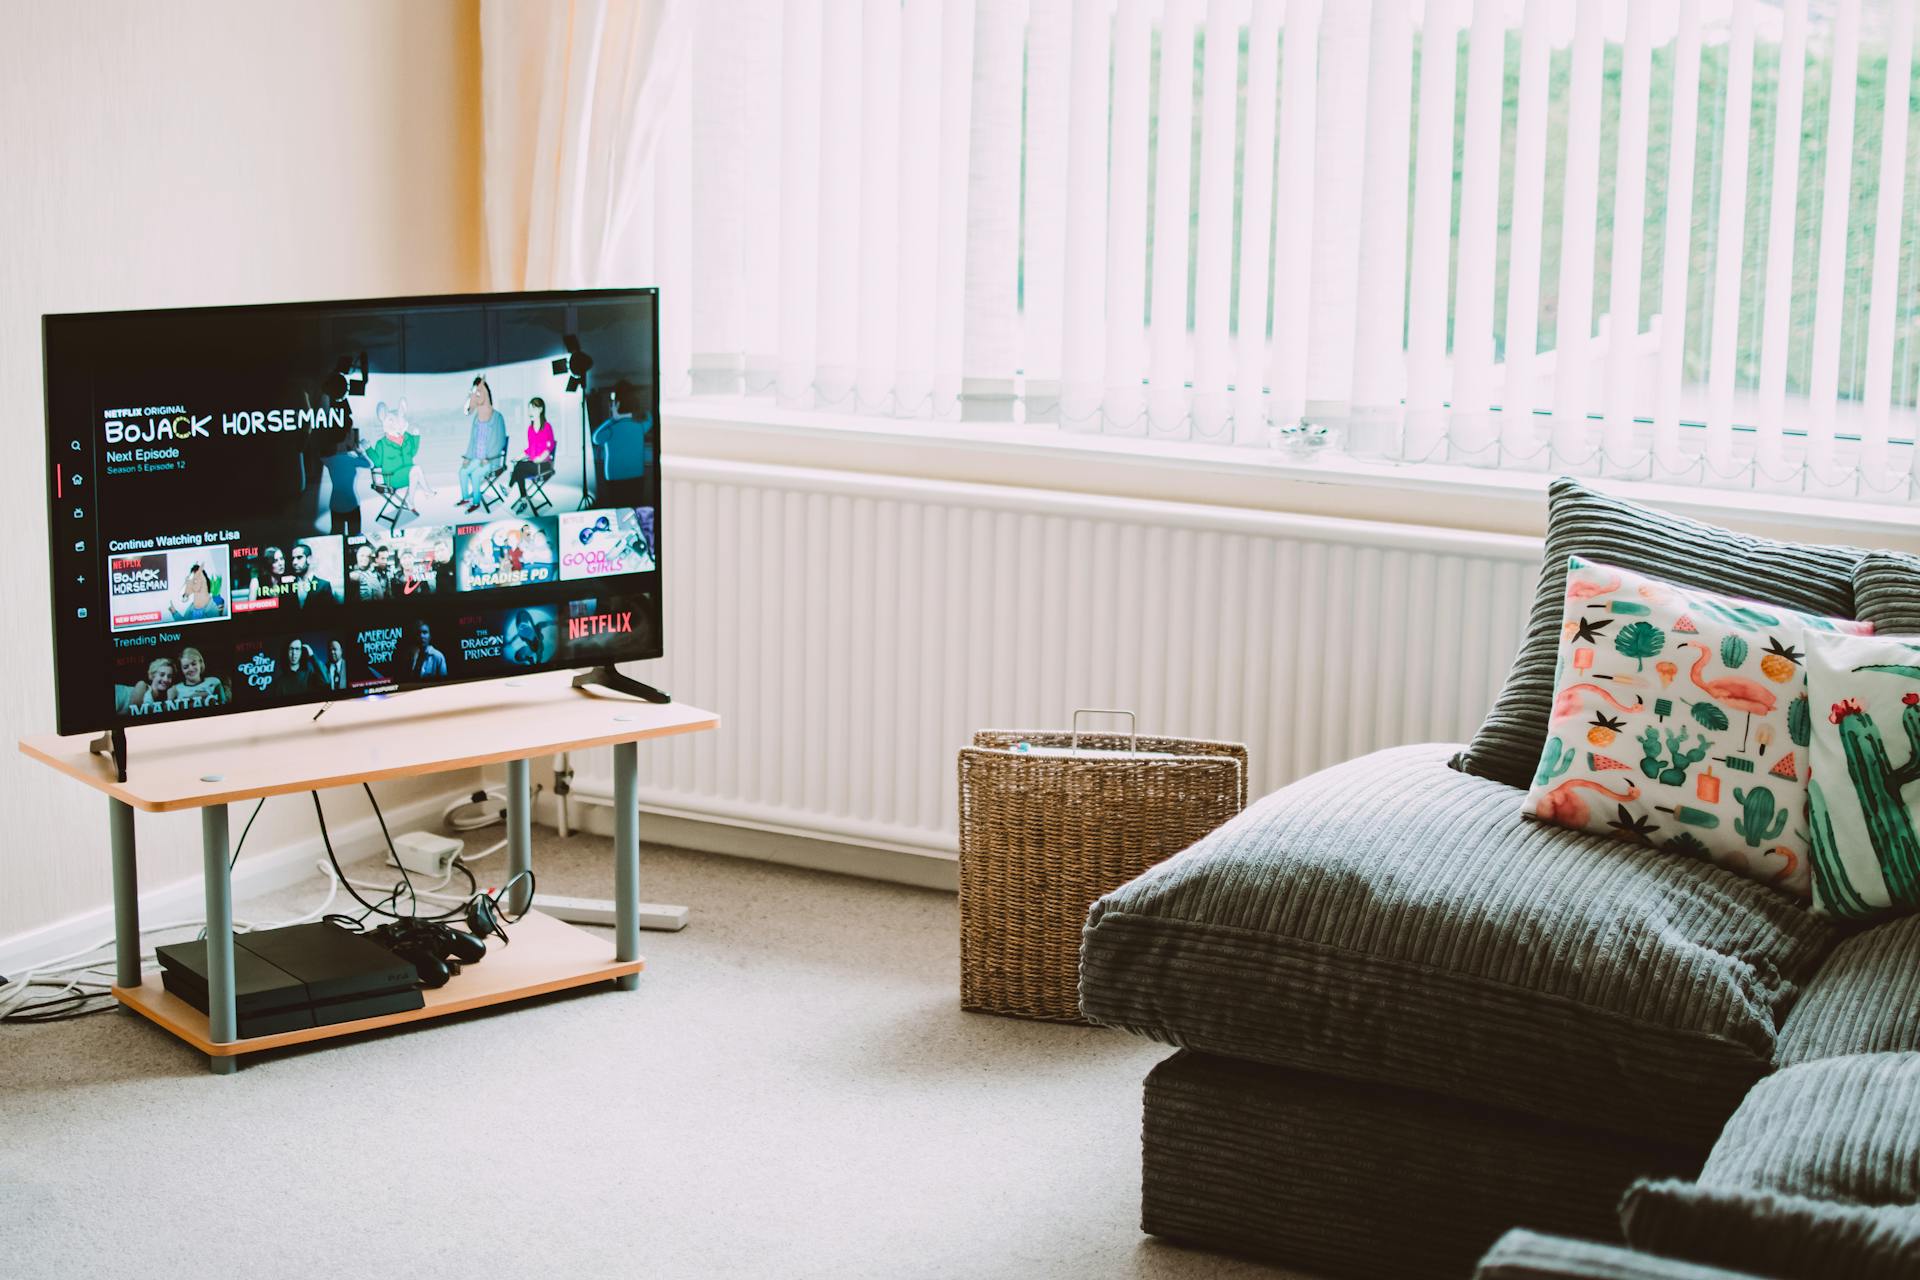 How to Manage Your Netflix Household in the Netflix Help Center